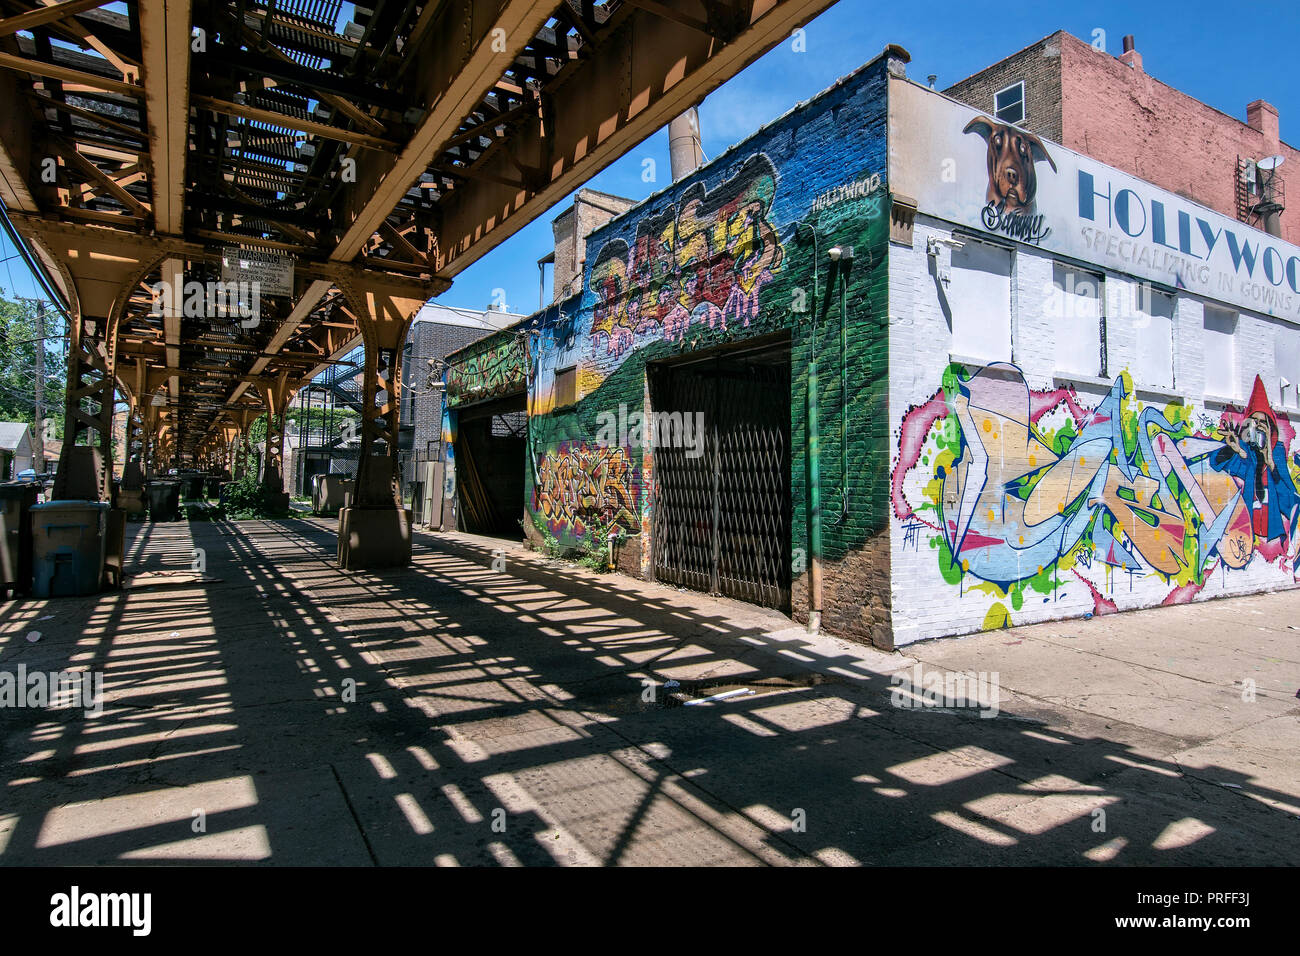 The L elevated train and wall mural, Wicker Park, Chicago, Illinois, USA Stock Photo